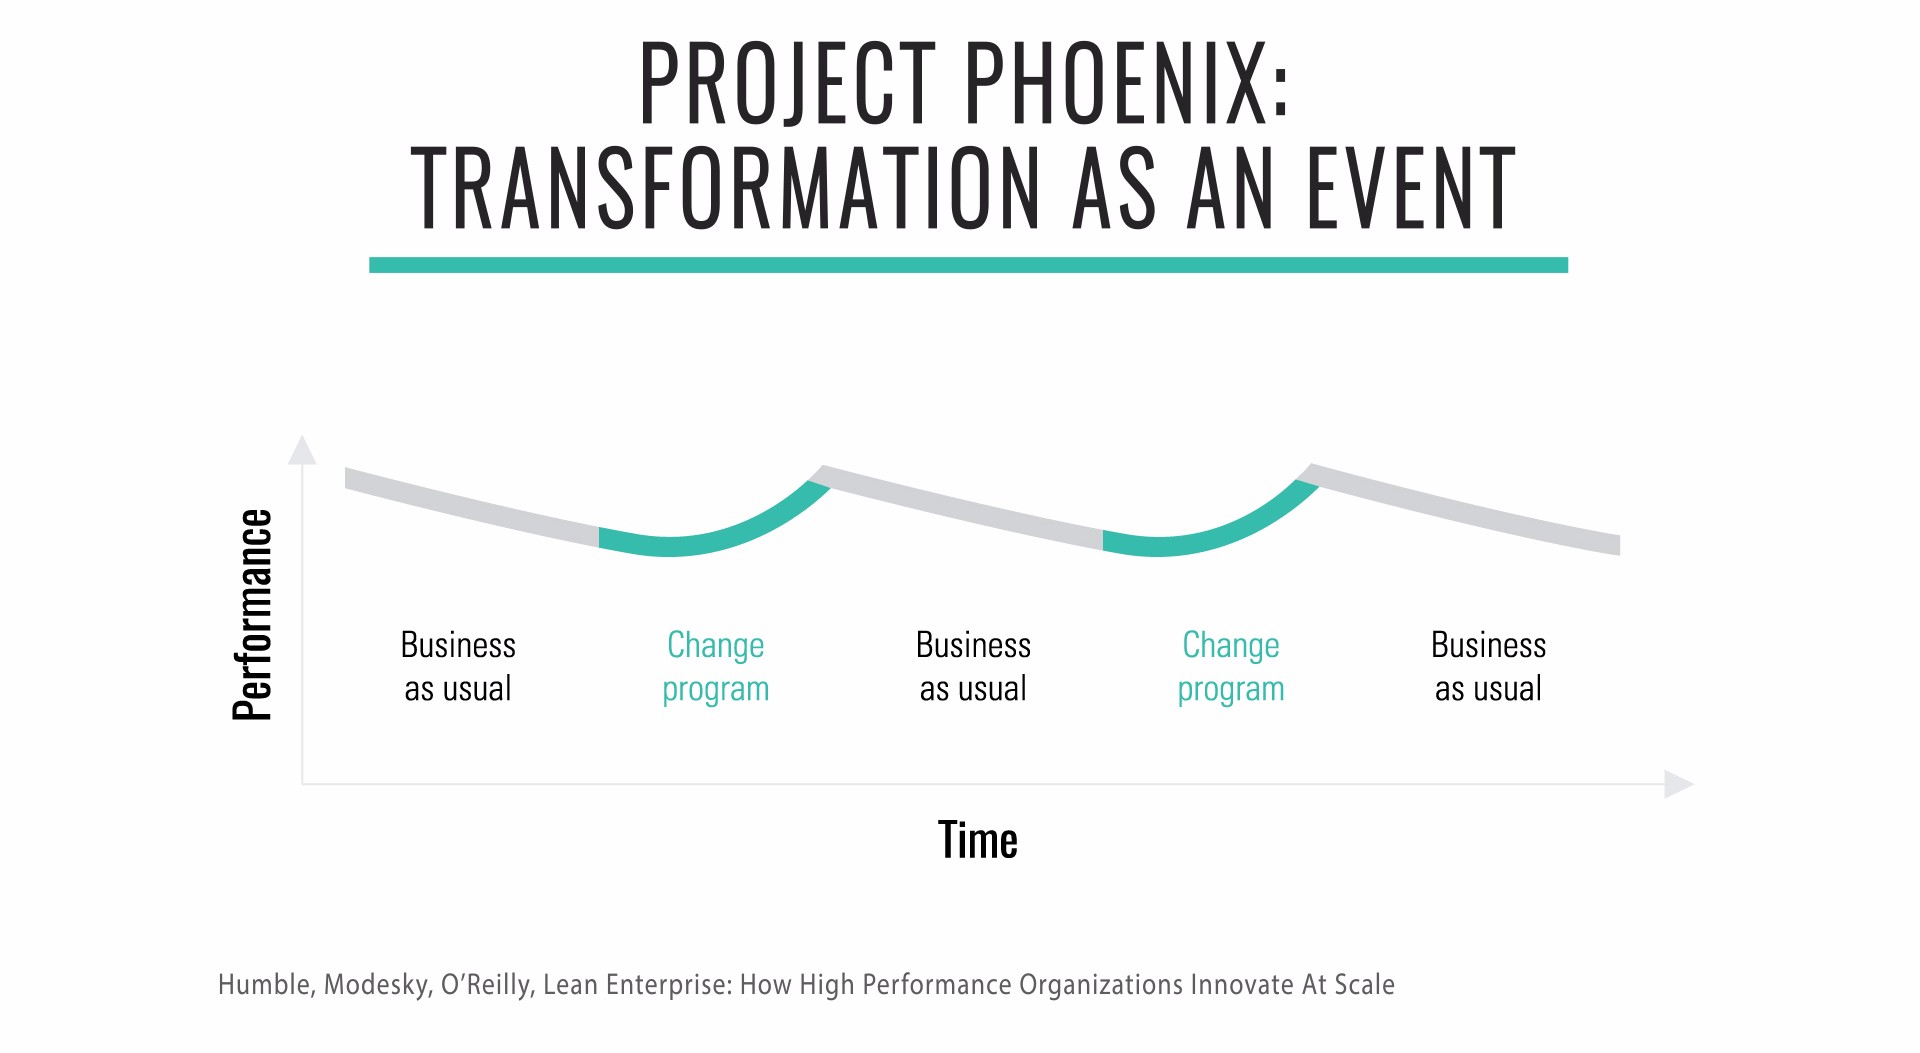 Transformation as an event